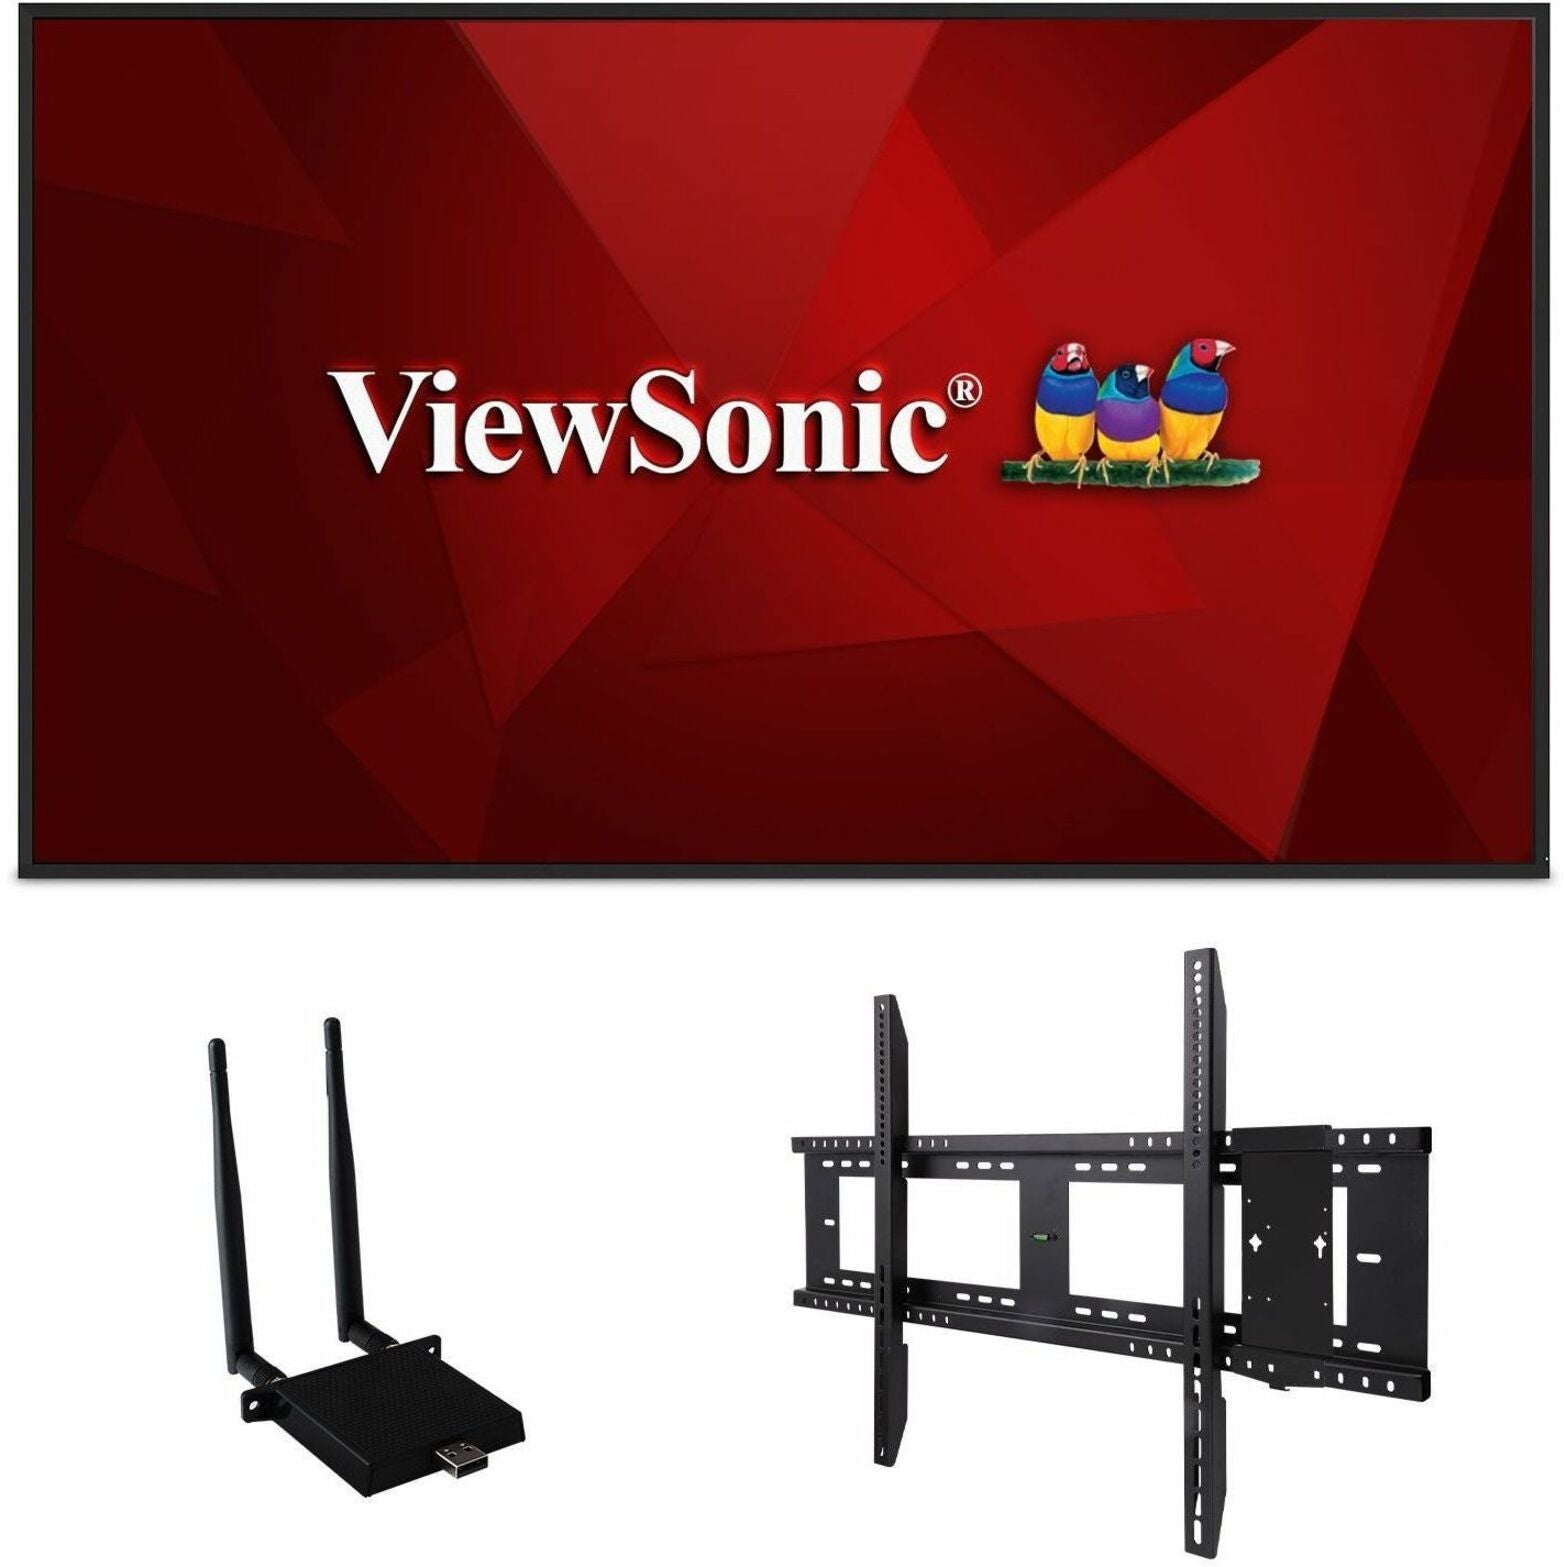 ViewSonic CDE7530-E1 Digital Signage Display, 4K, Integrated Software, WiFi Adapter and Fixed Wall Mount